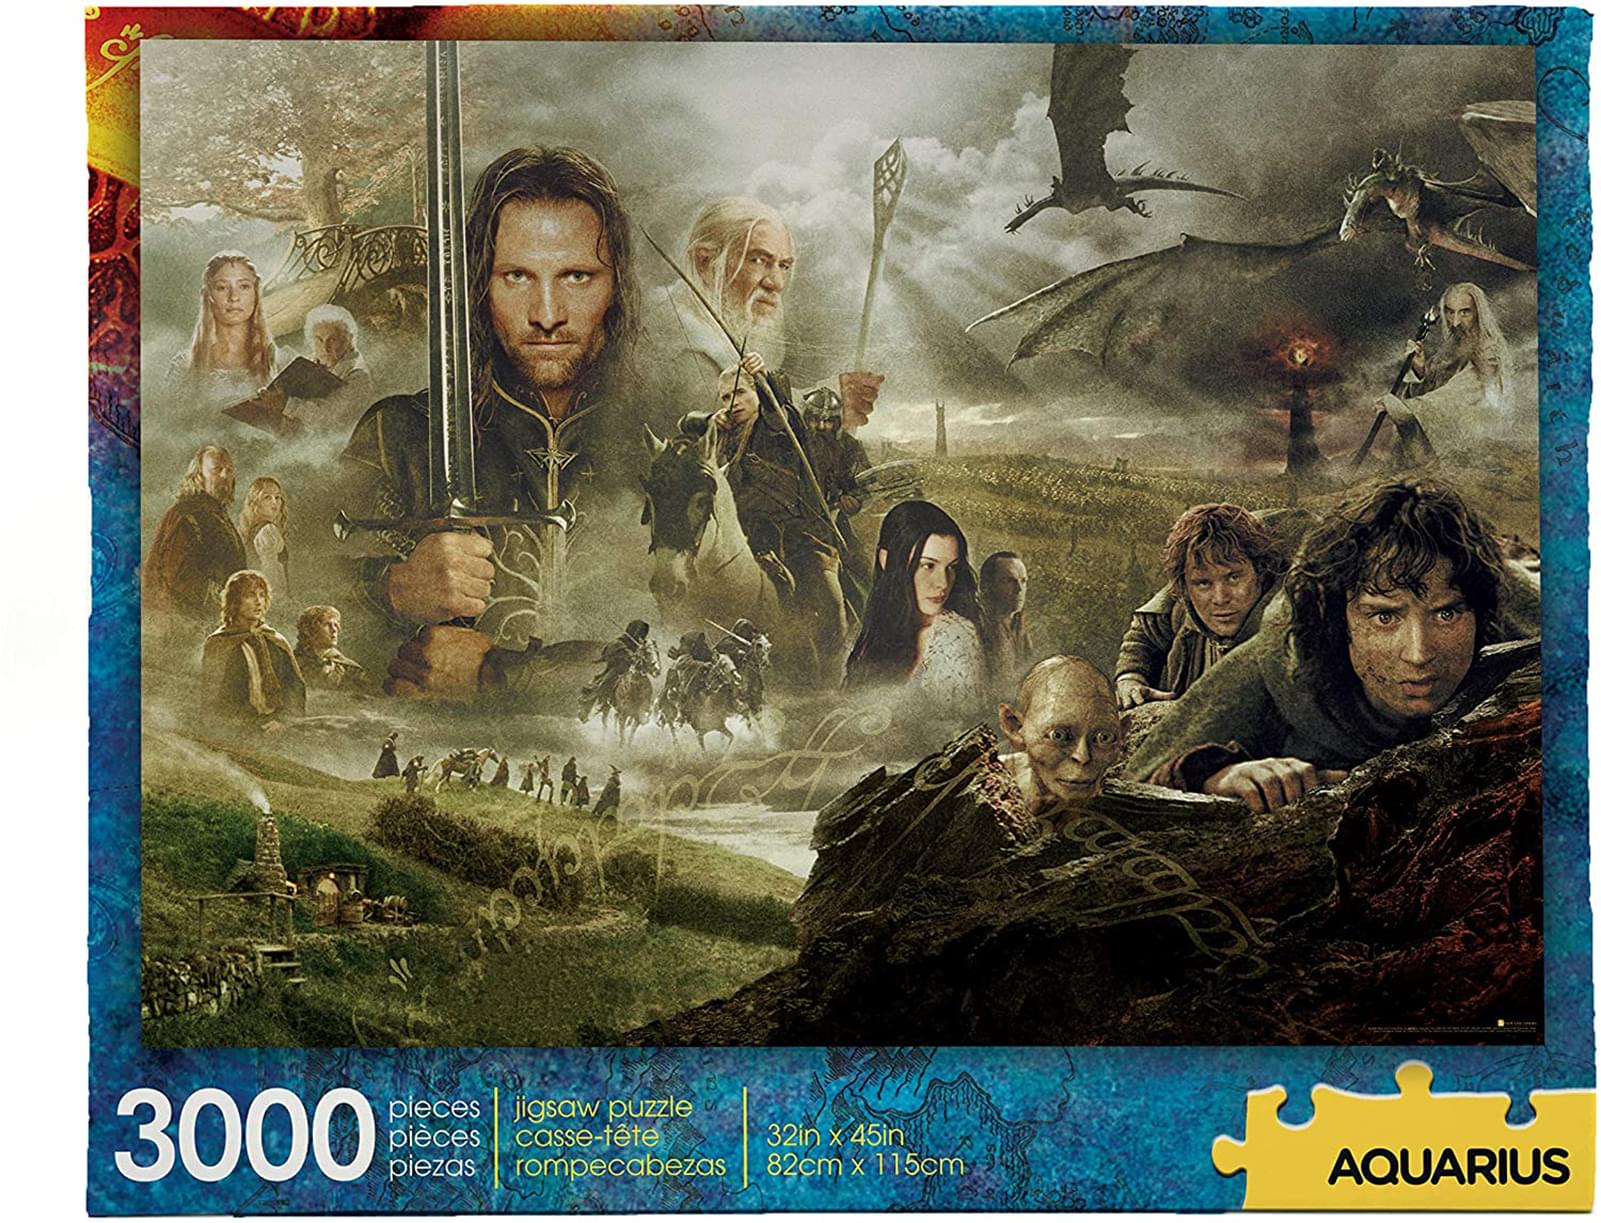 Lord of the Rings 3000 Piece Jigsaw Puzzle